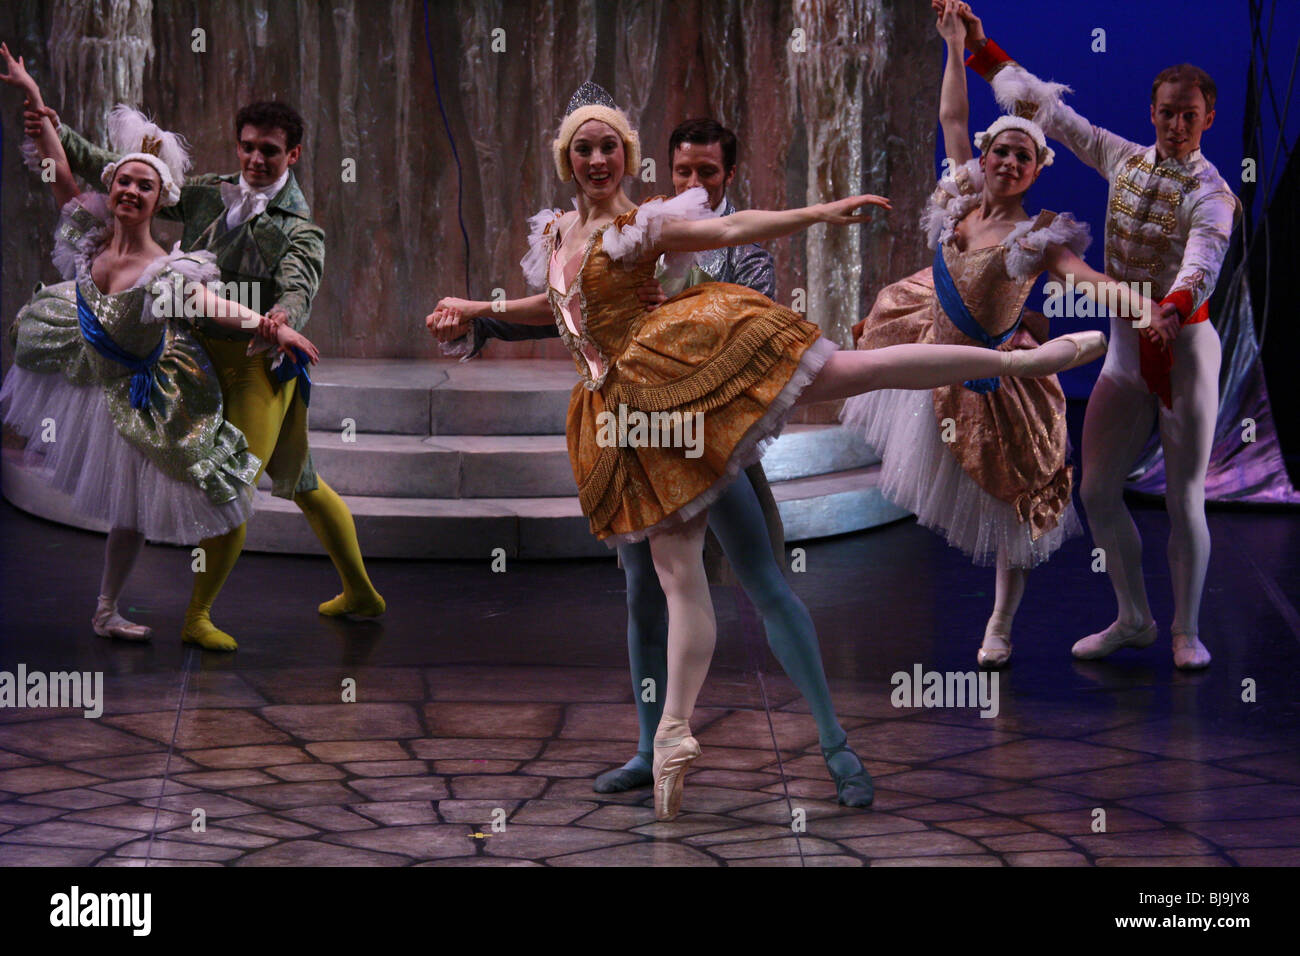 male female ballet dancers performers group stage Stock Photo